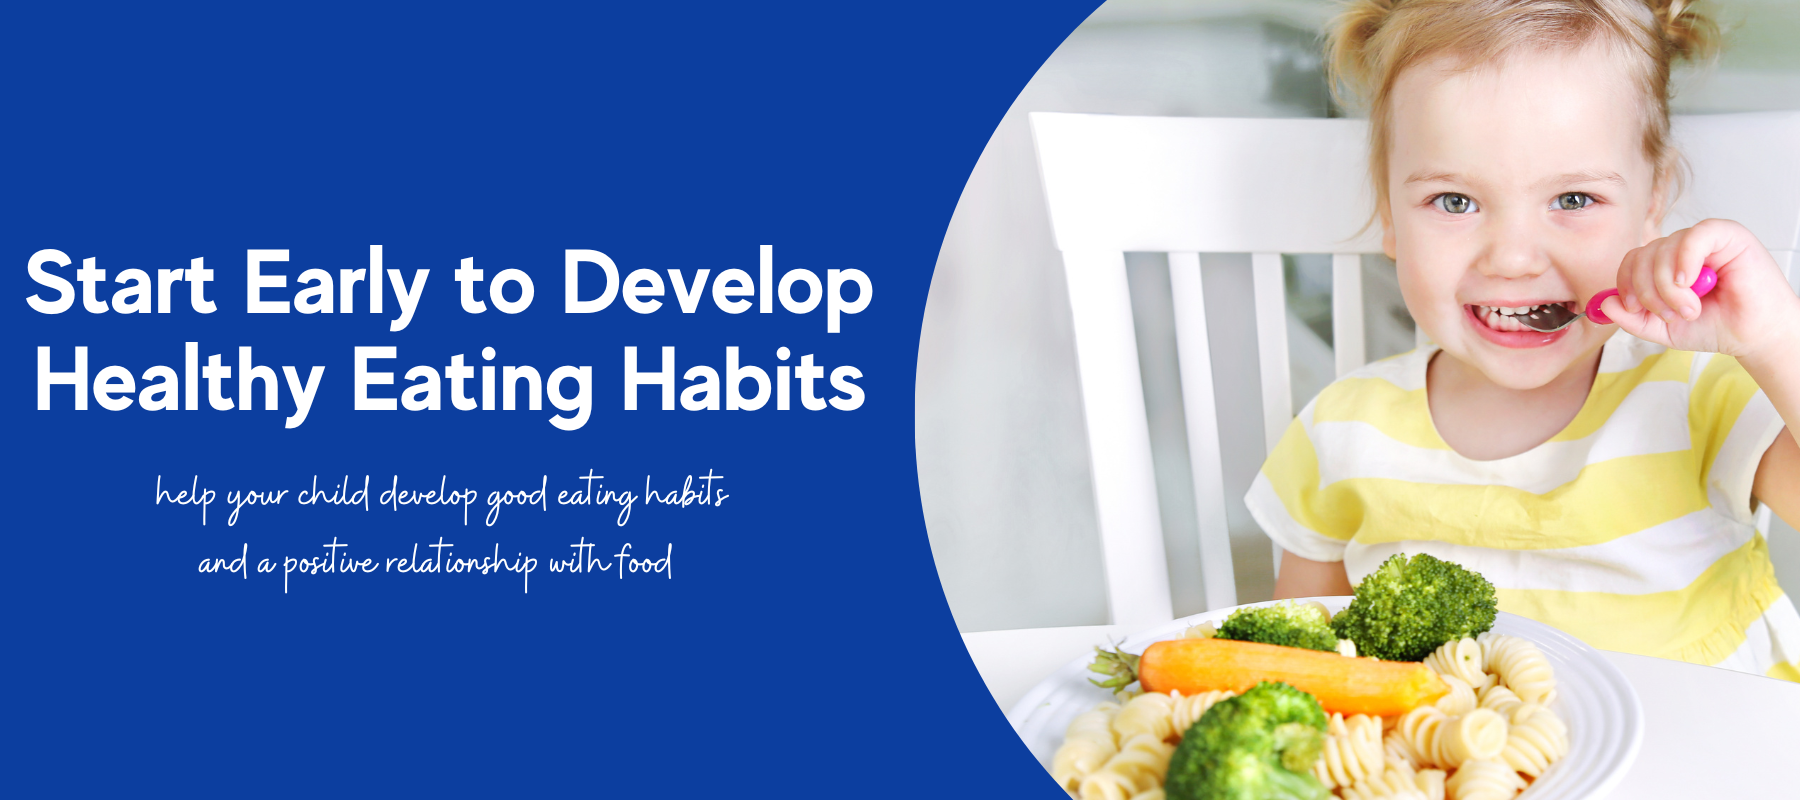 Start Early to Develop Healthy Eating Habits